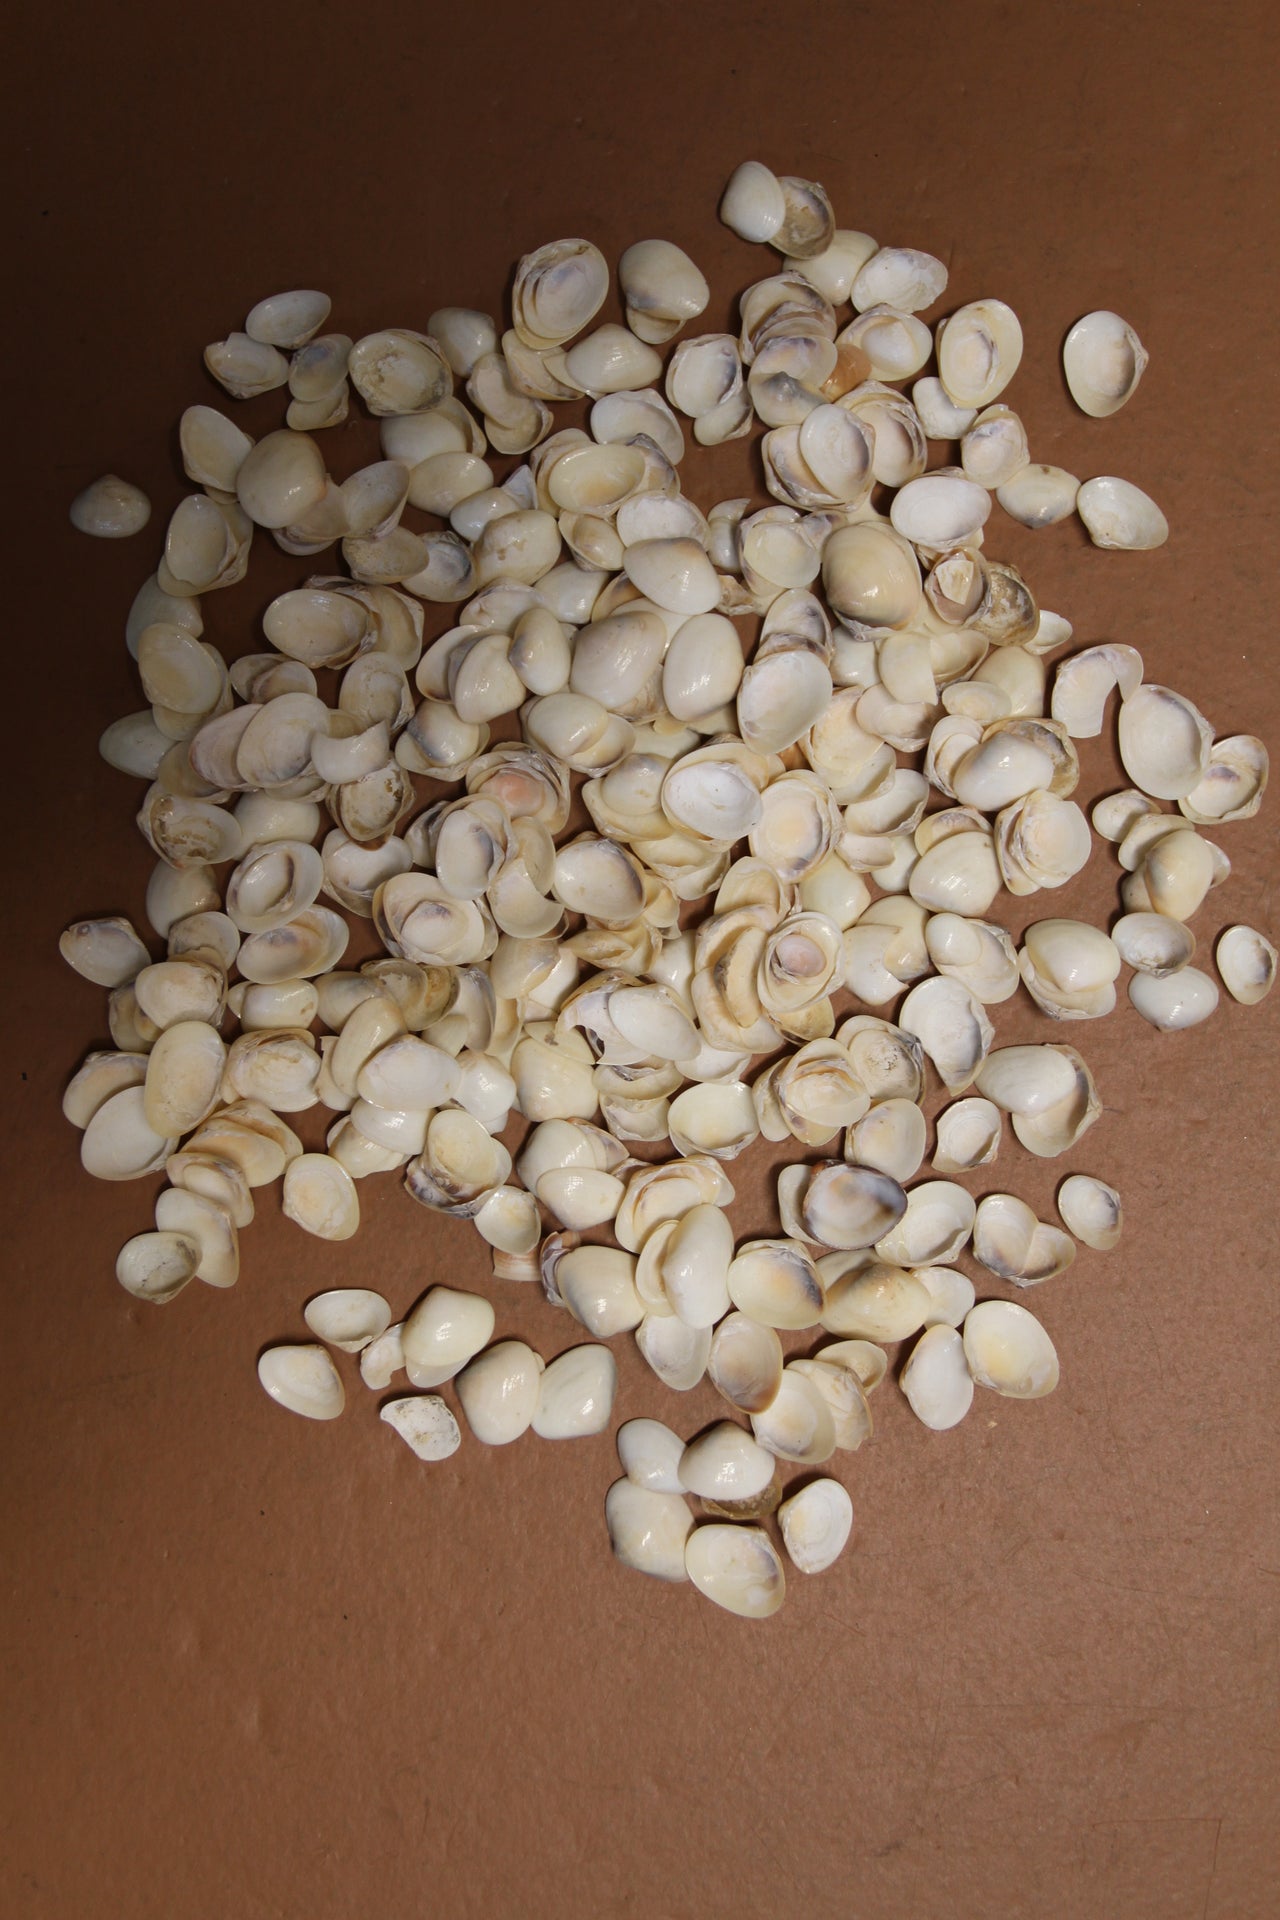 Buy by the LB - Tan Cay Cay ~ Is a small seashells used by shell crafters for Sailors Valentines,